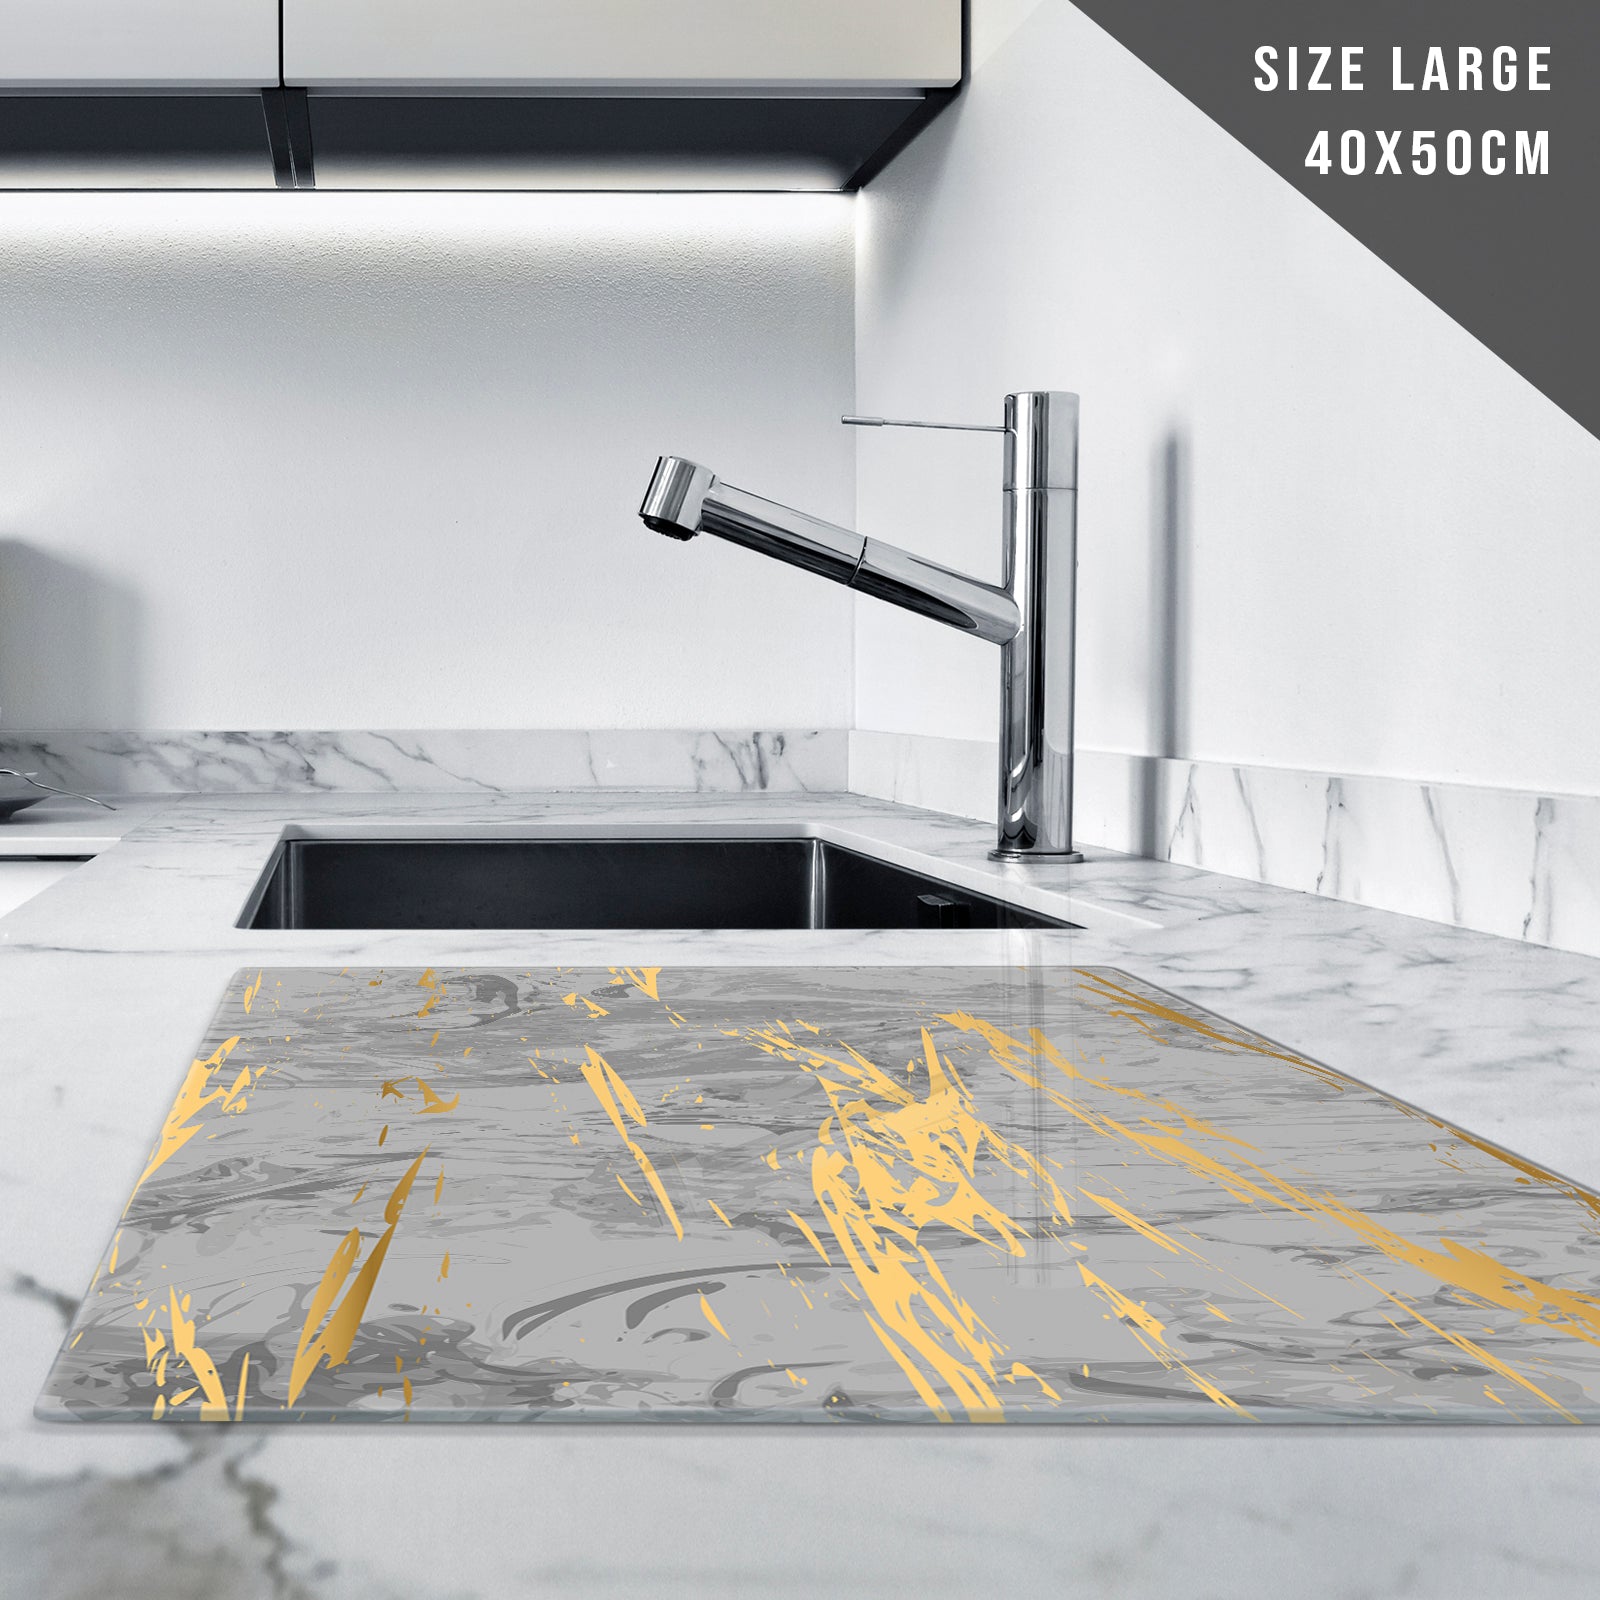 Glass Chopping Board For Kitchen in Gold Grey Design